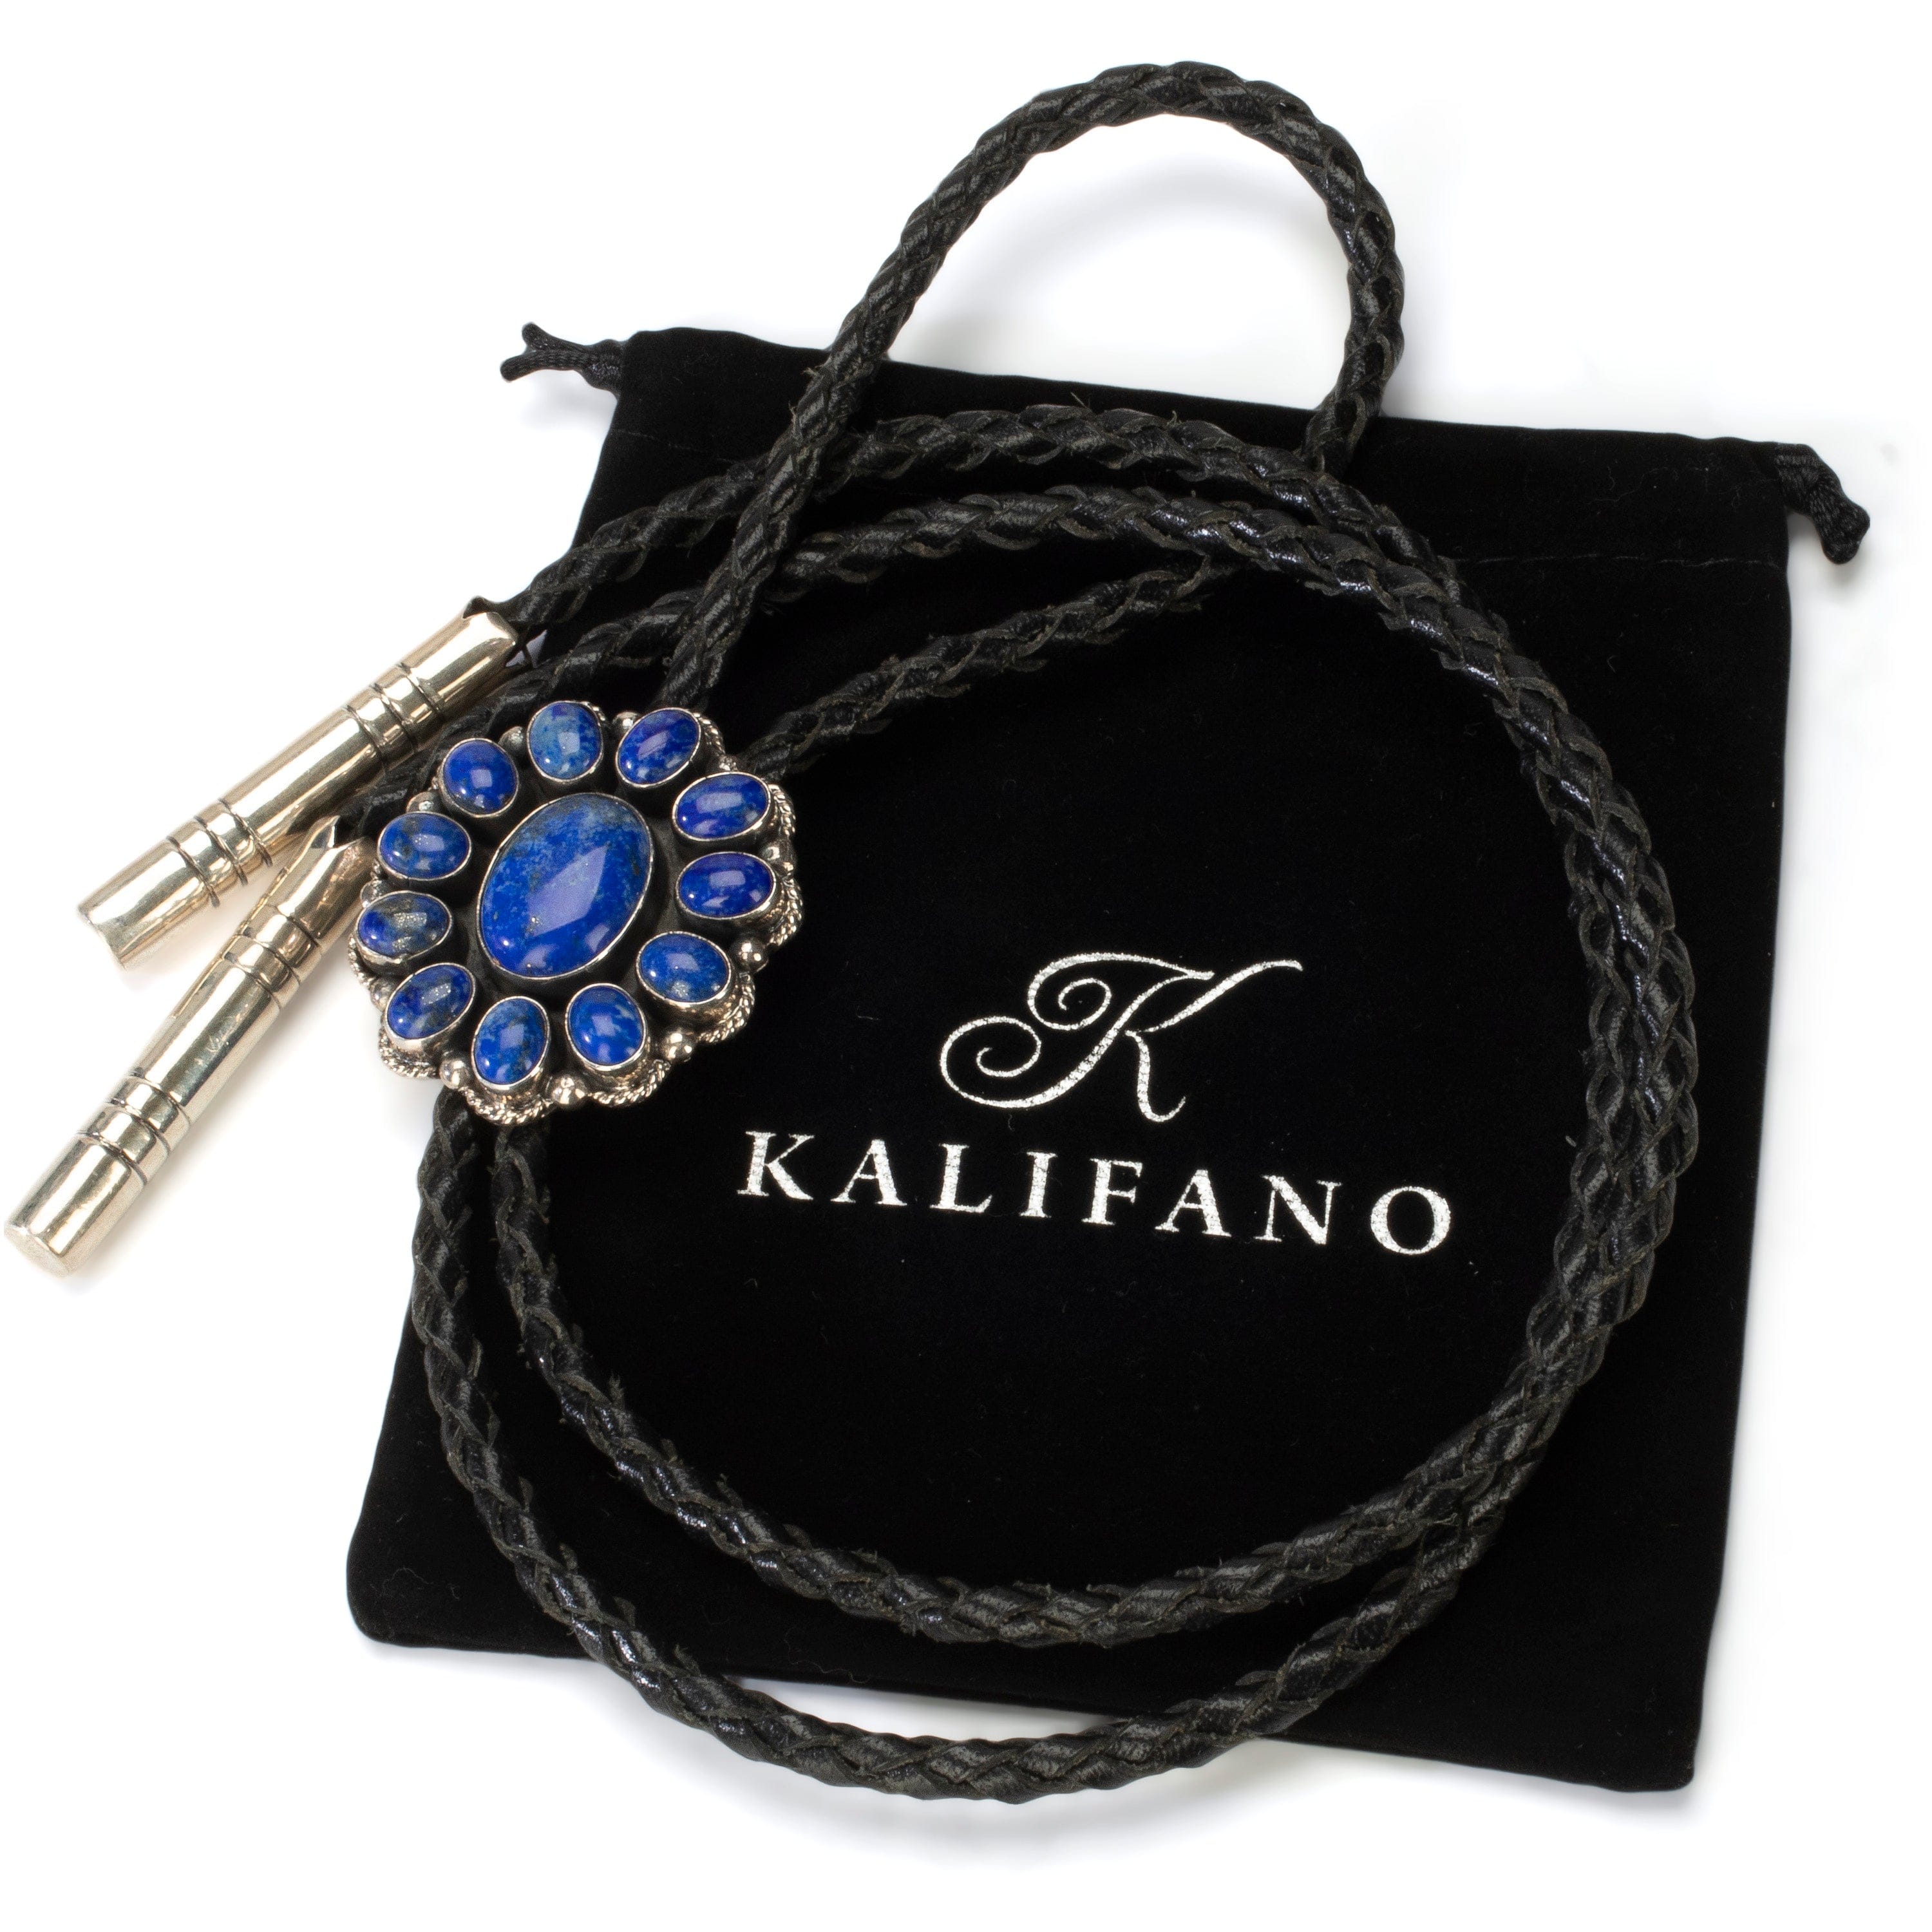 Kalifano Native American Jewelry Lewistus Silversmith Navajo Lapis Flower USA Native American Made 925 Sterling Silver Bolo Tie NABT2200.001